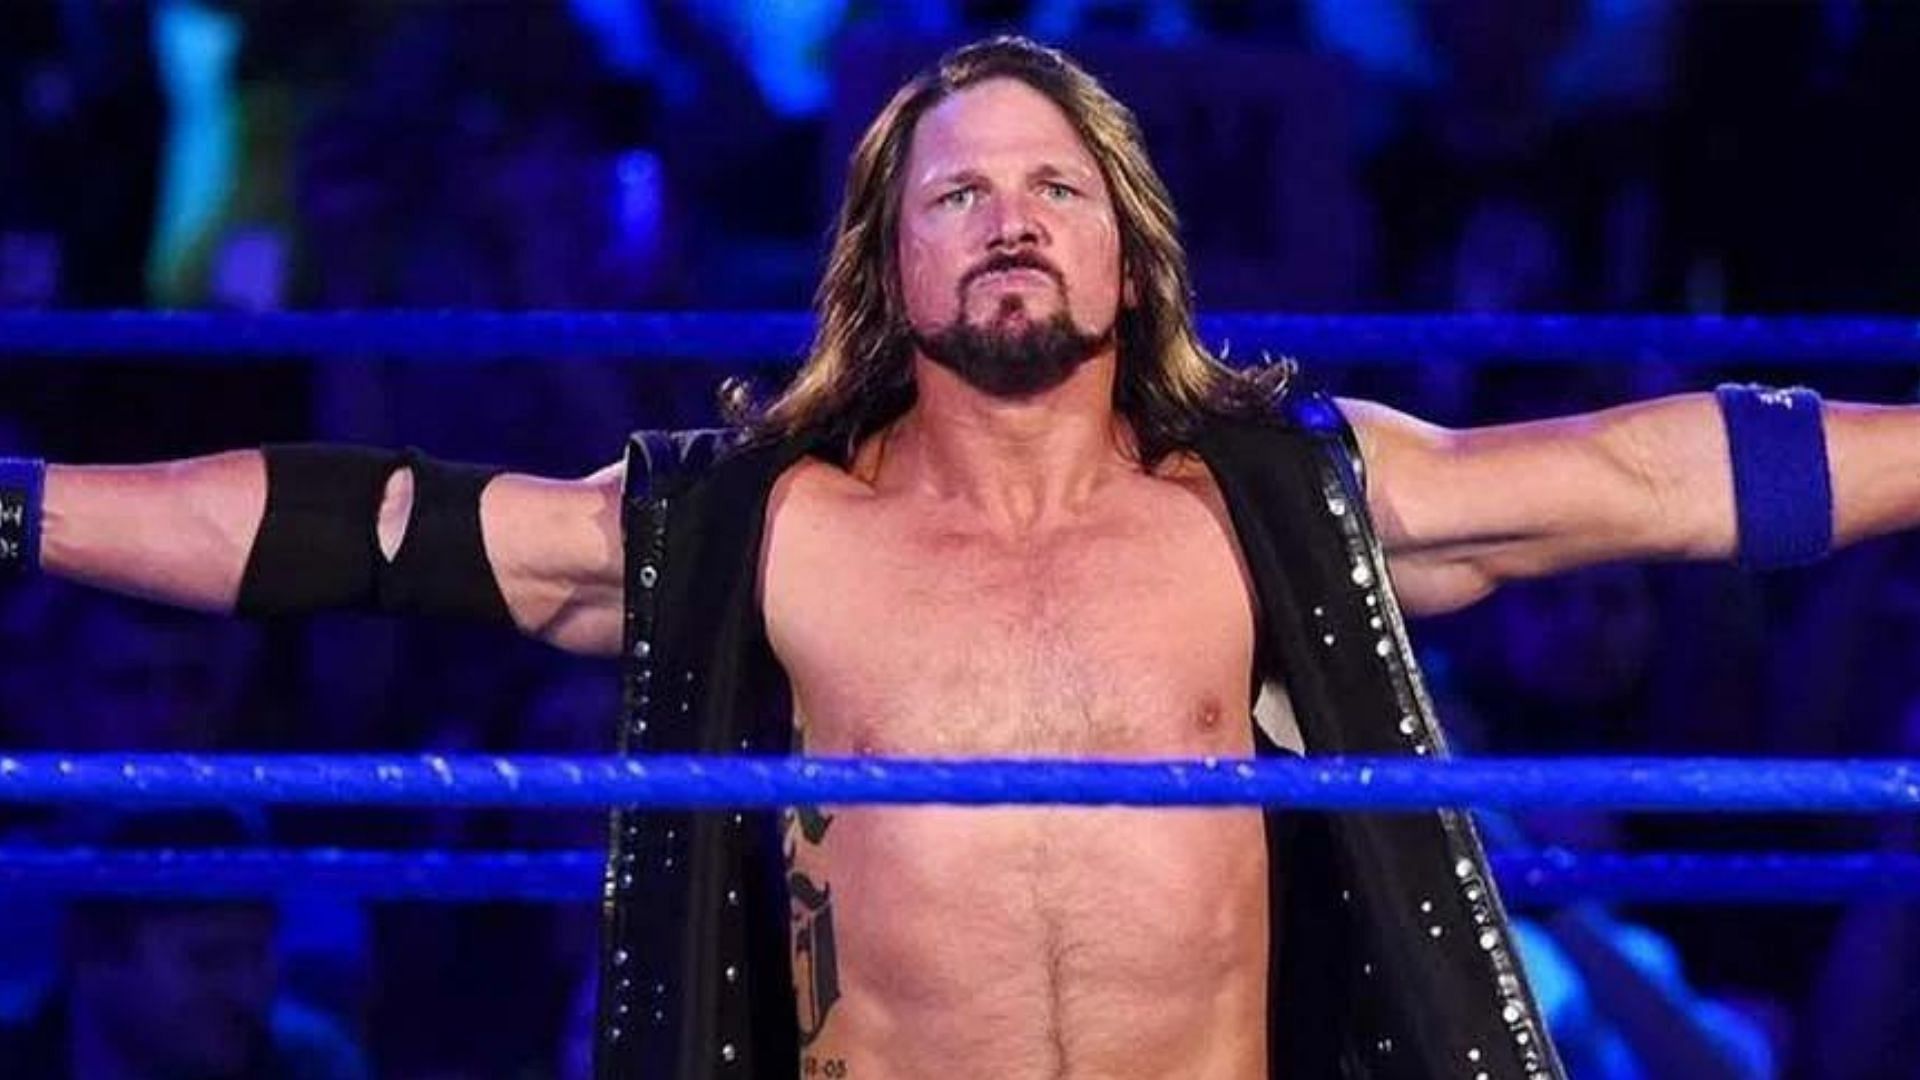 Who should confront AJ Styles if they join WWE?